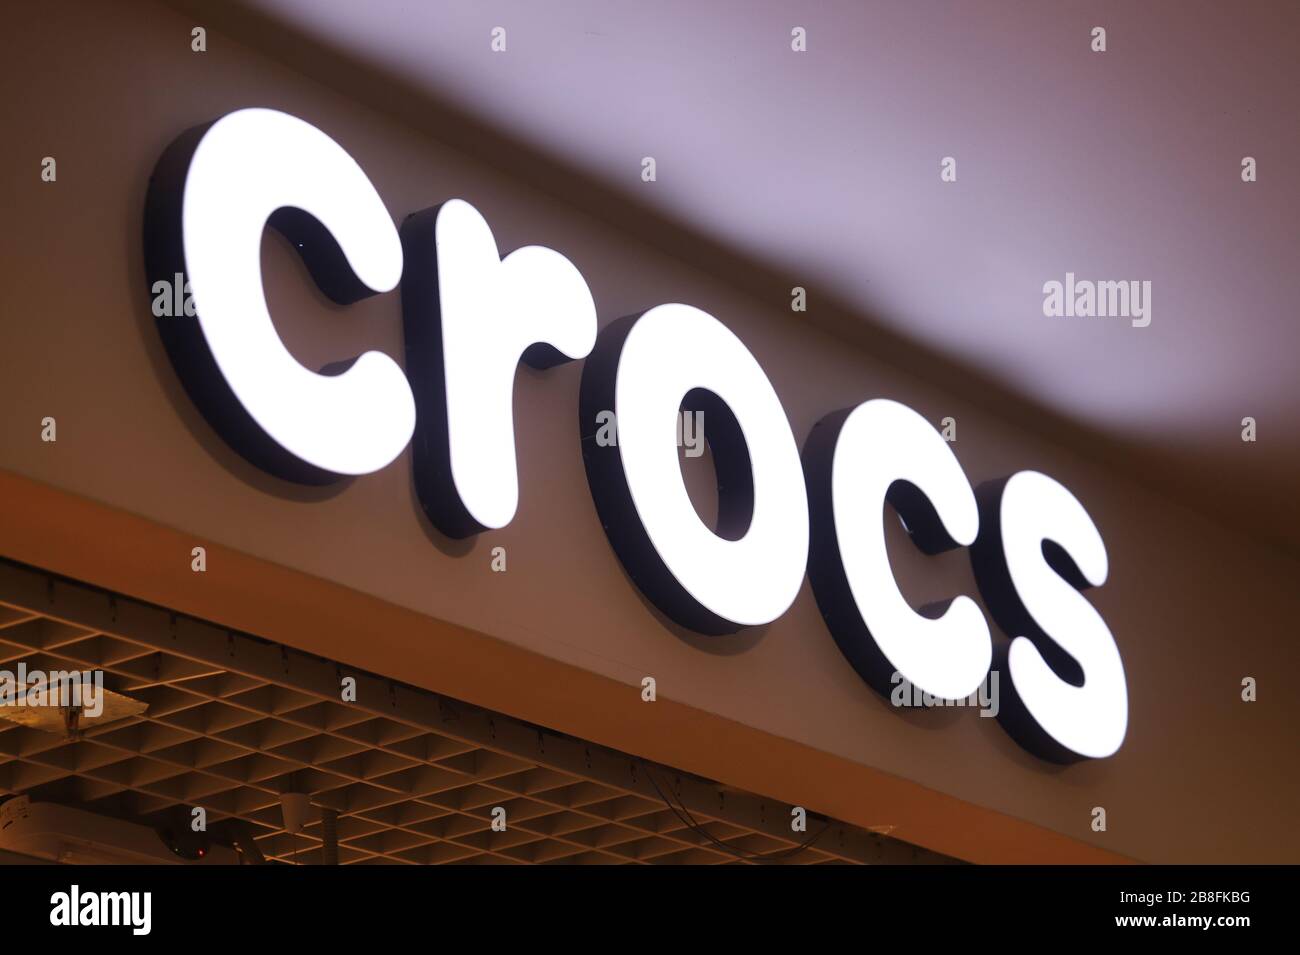 Crocs logo seen at Galeria Shopping and Entertainment Centre Stock Photo -  Alamy